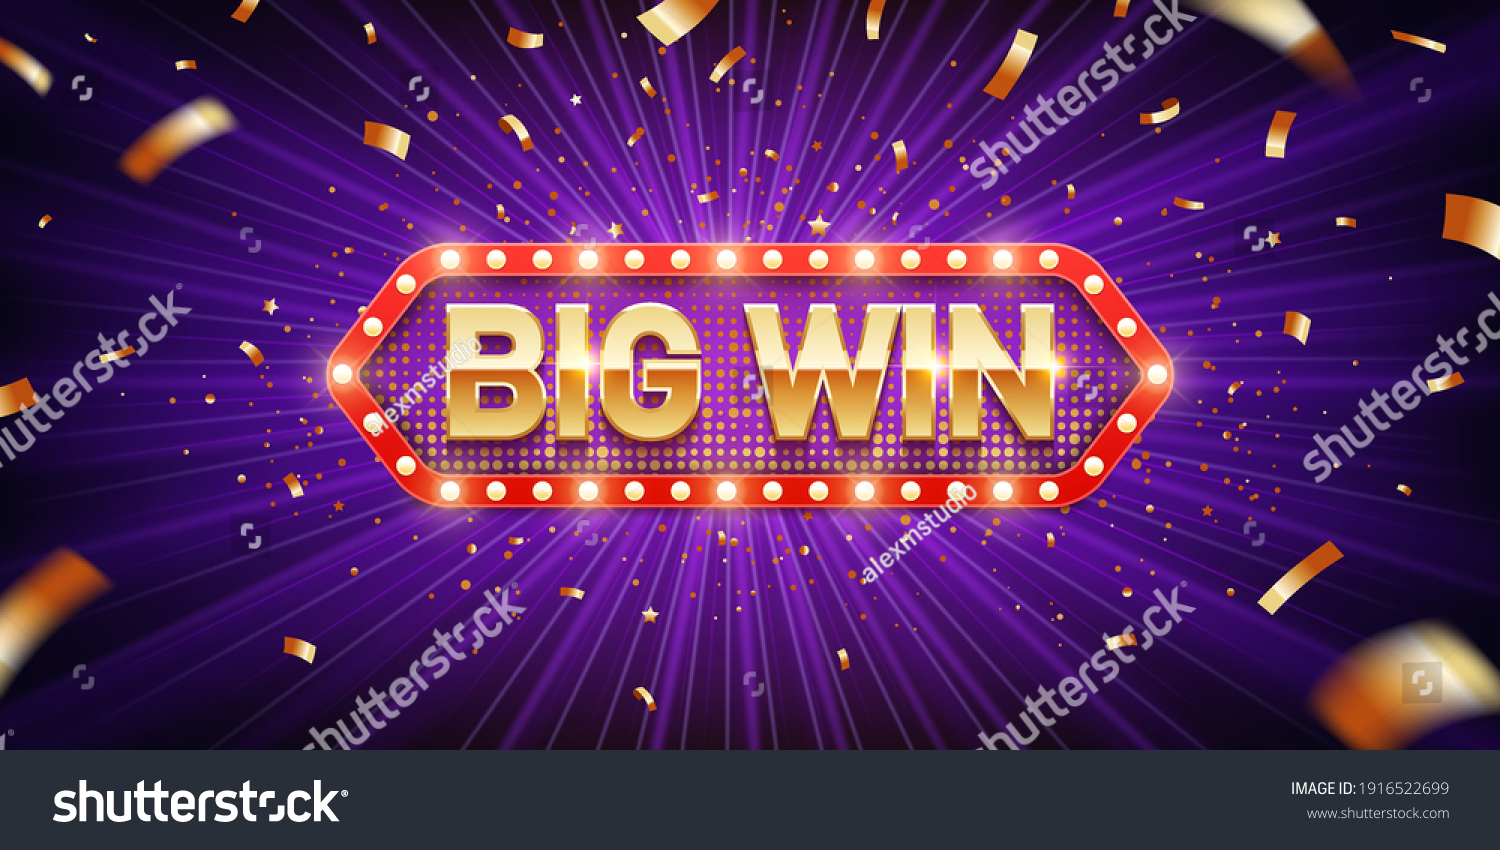 Big win. Retro big win congratulation banner with glowing light bulbs and golden confetti on a burst purple background. Winners of poker, jackpot, roulette, cards or lottery. #1916522699